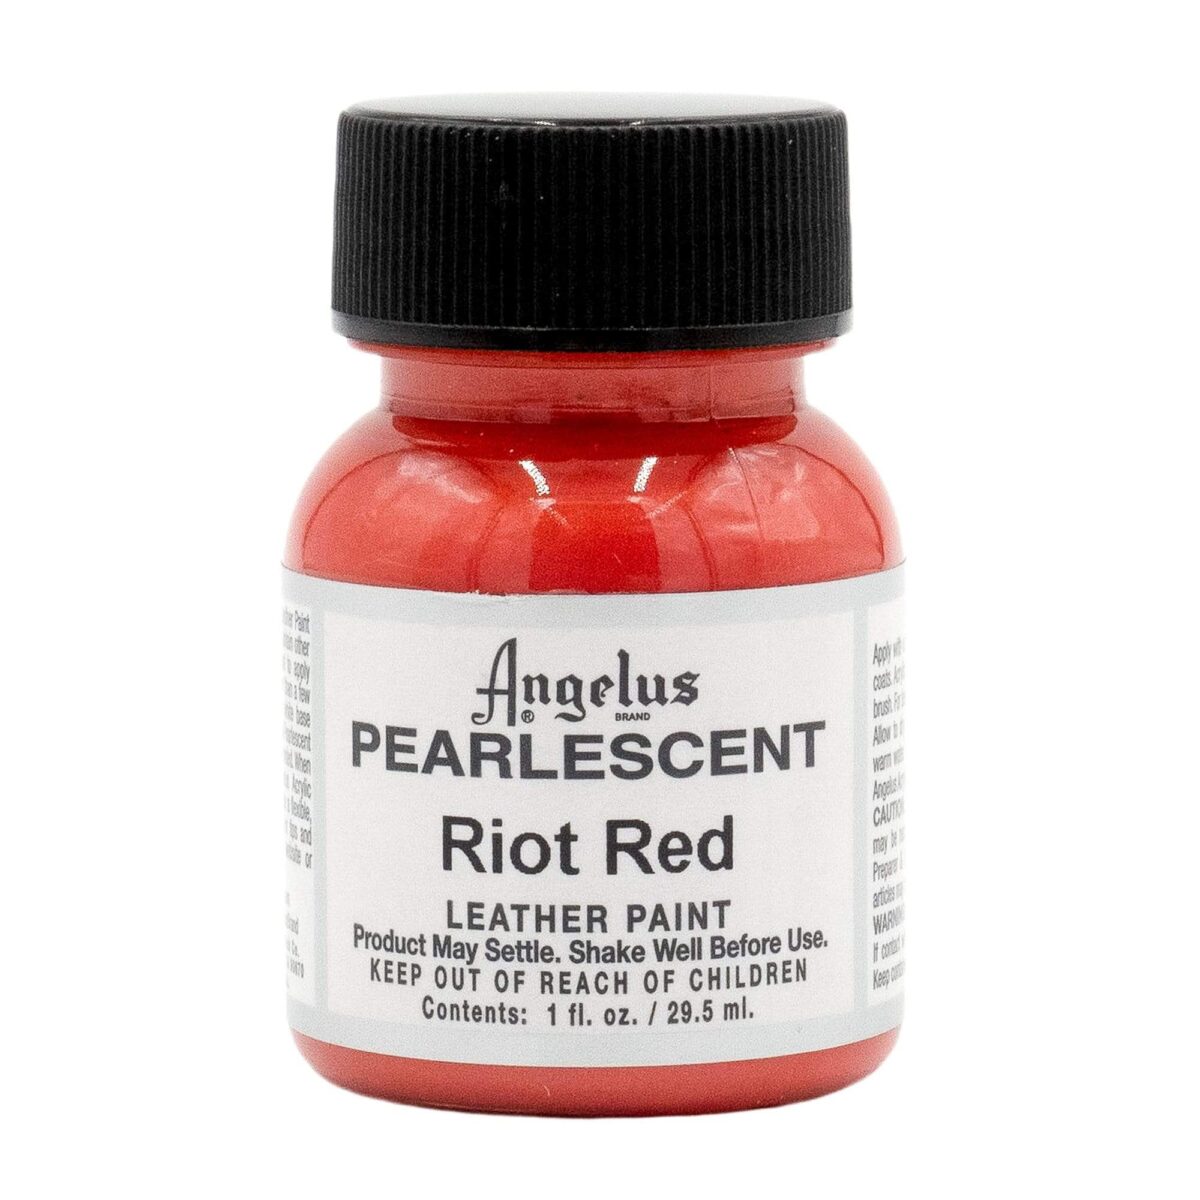 Angelus Pearlescent Riot Red 1oz